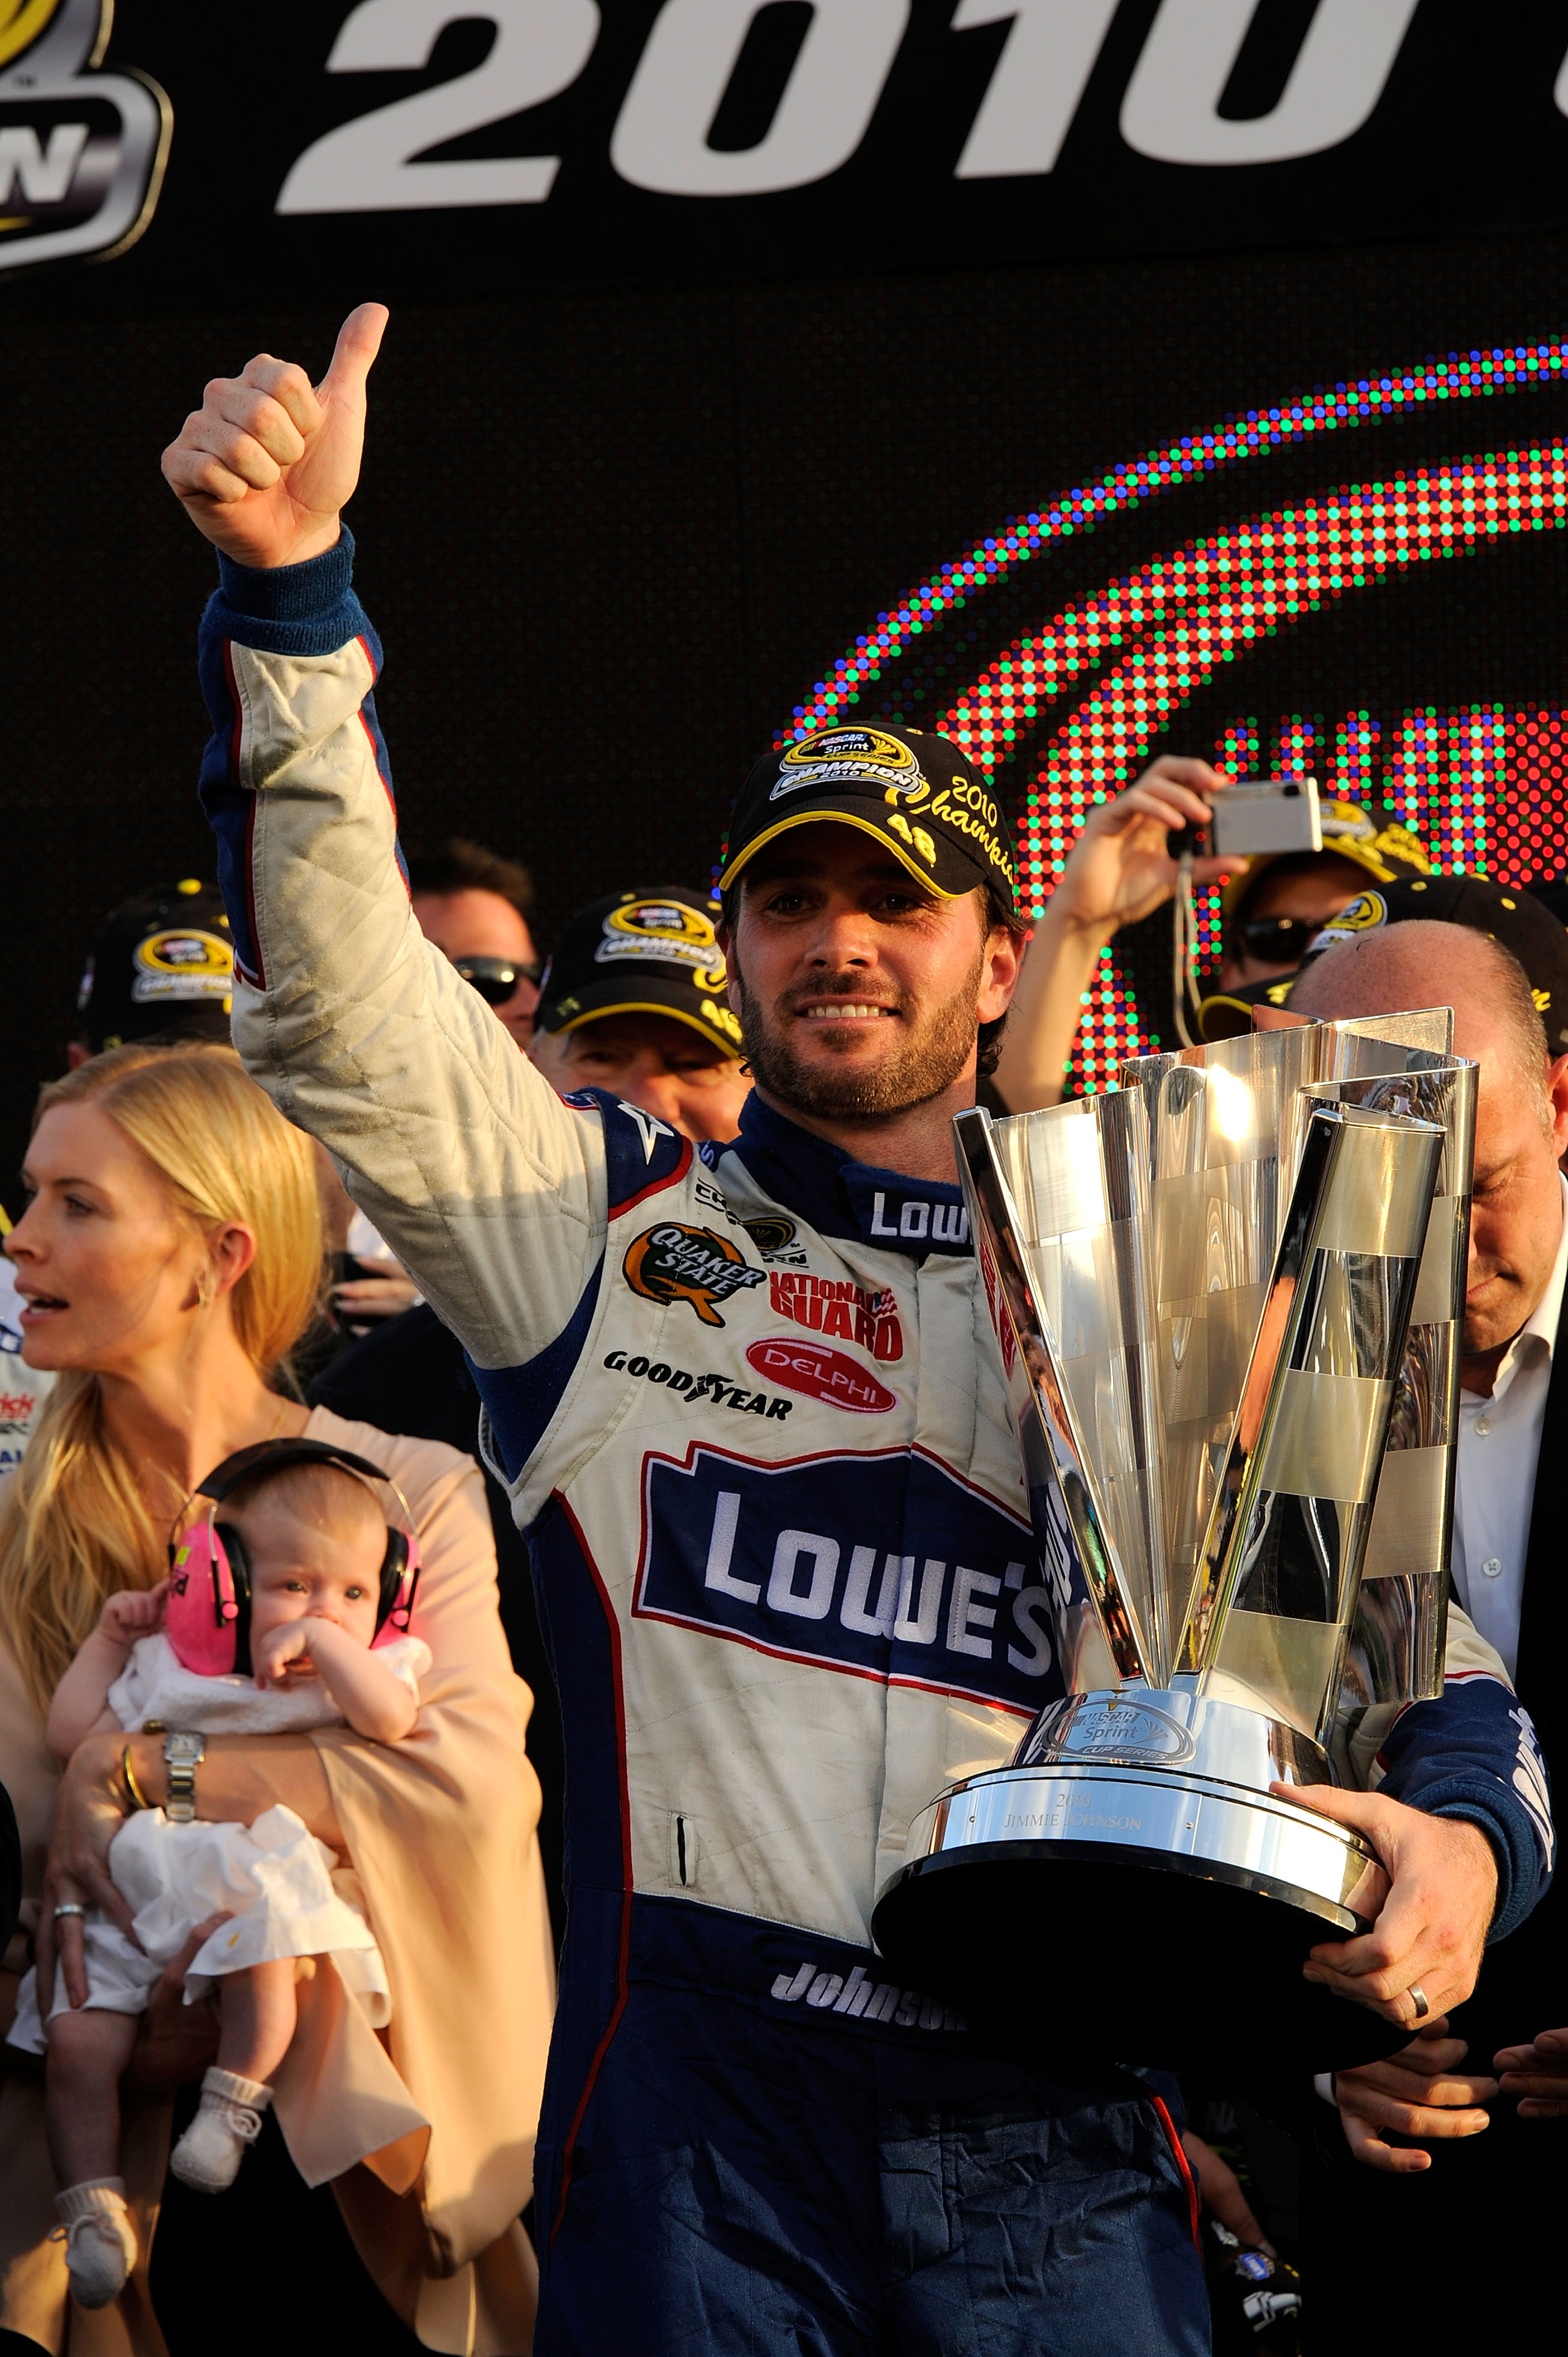 HOMESTEAD, FL - NOVEMBER 21:  Jimmie Johnson, driver of the #48 Lowe's Chevrolet, celebrates after finishing in second place in the Ford 400 to clinch his fifth consecutive NASCAR Sprint Cup championship as his wife Chandra (L) and daughter Genevieve look